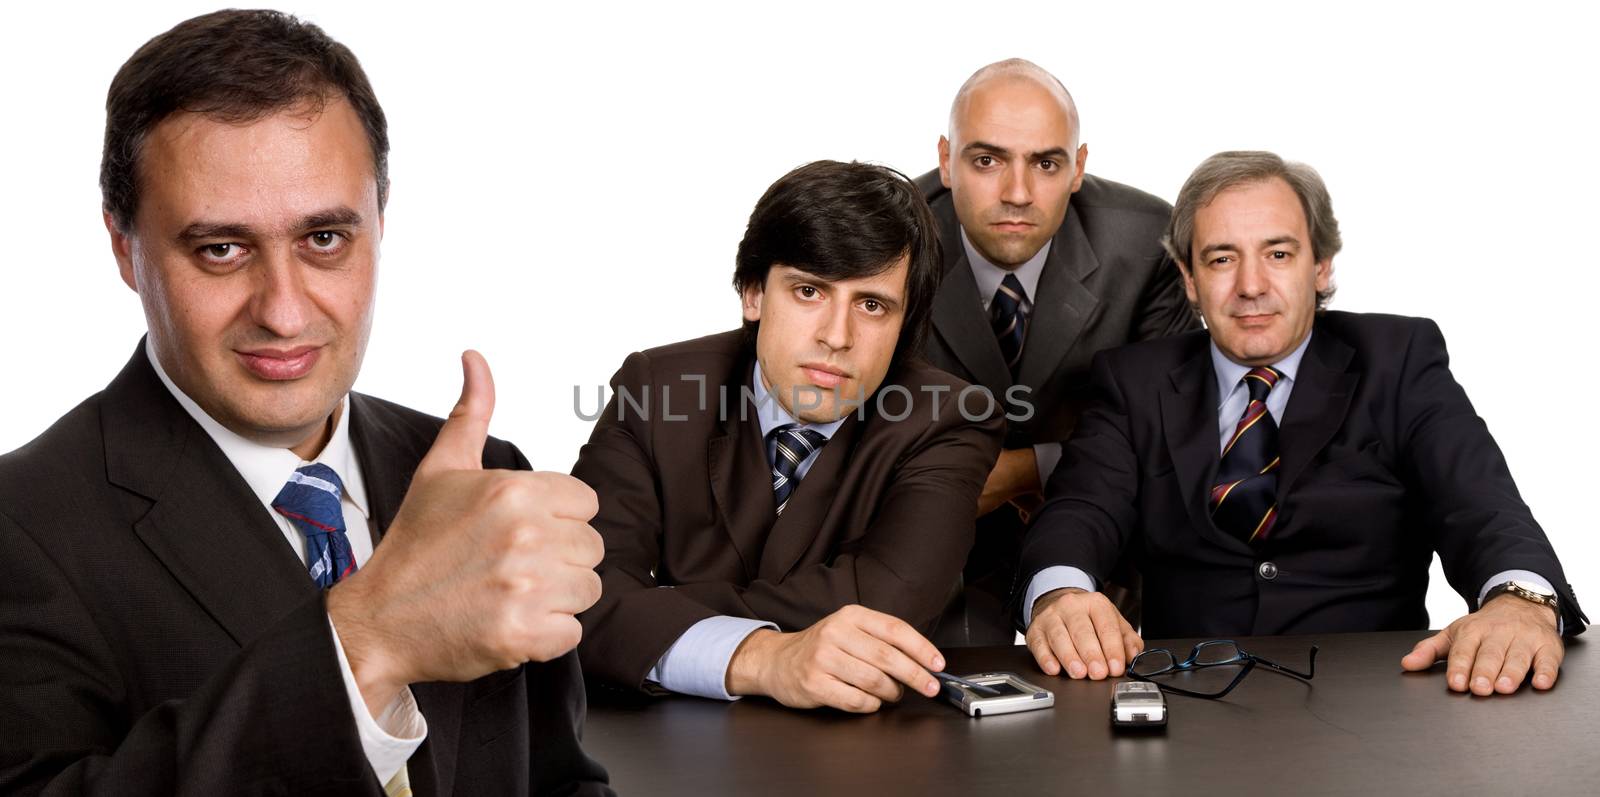 group of workers on a desk, isolated on white